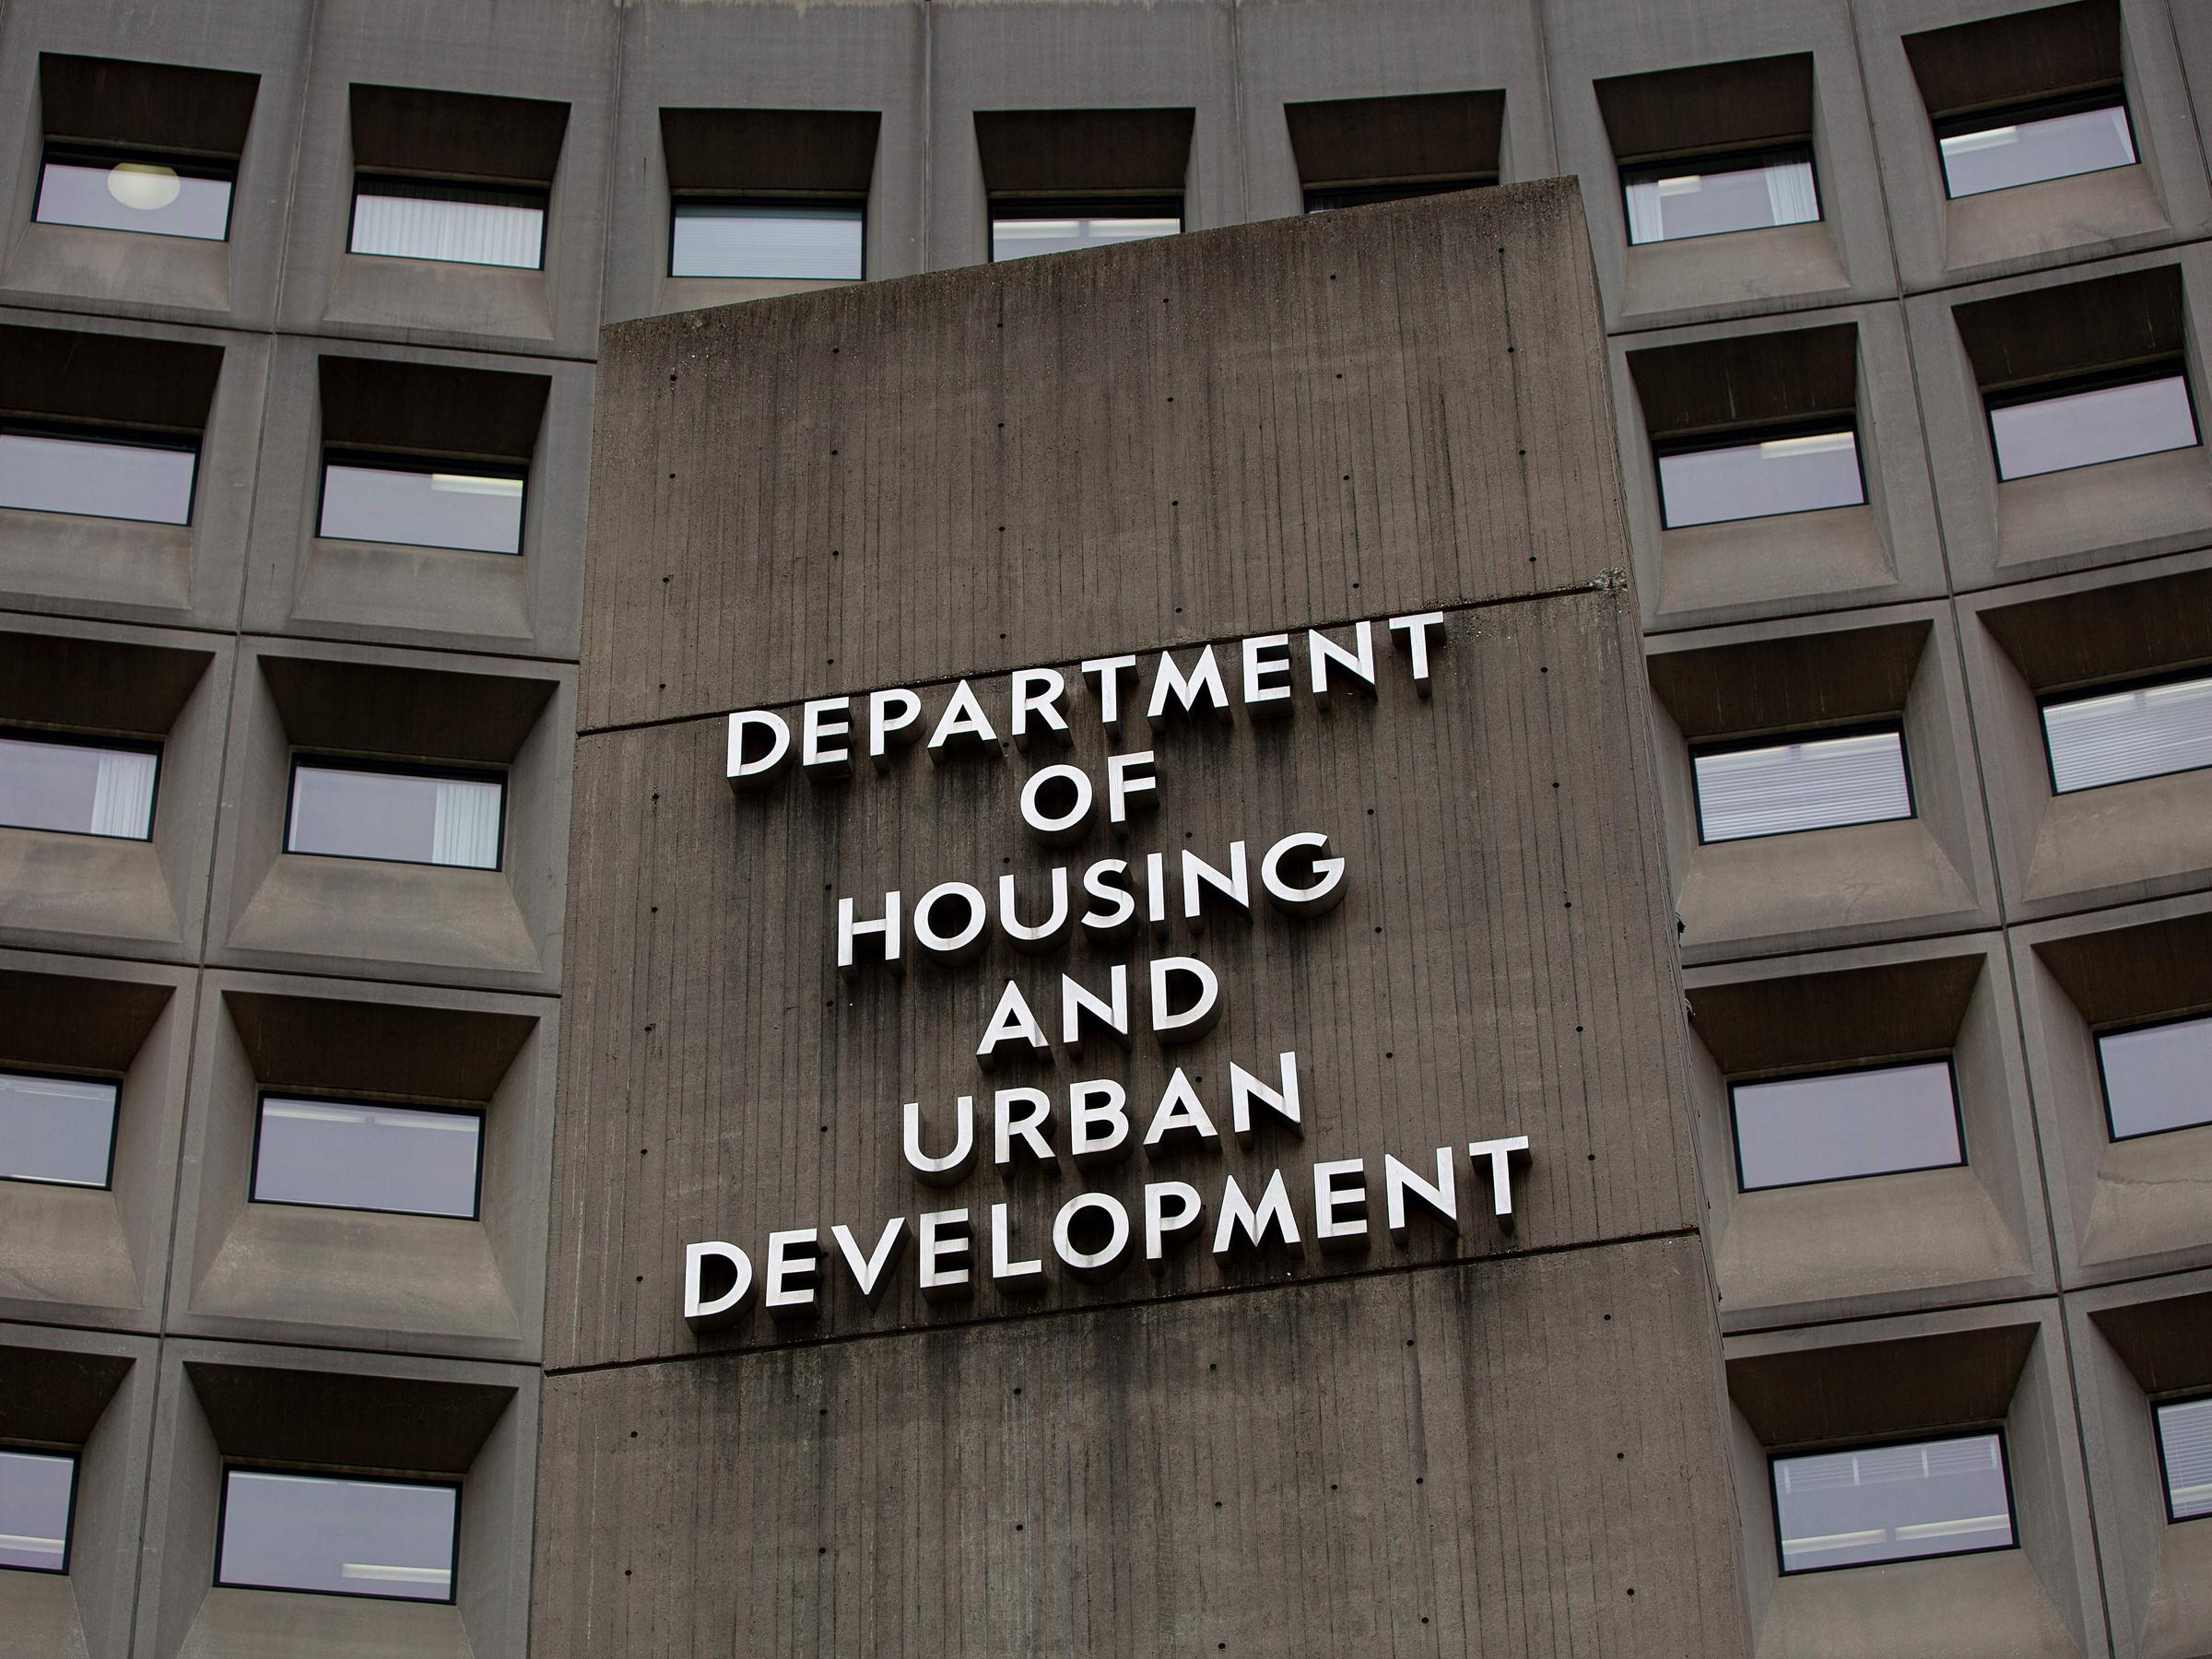 Hud To Probe Housing Bias Cases Involving Sexual Orientation Or Gender